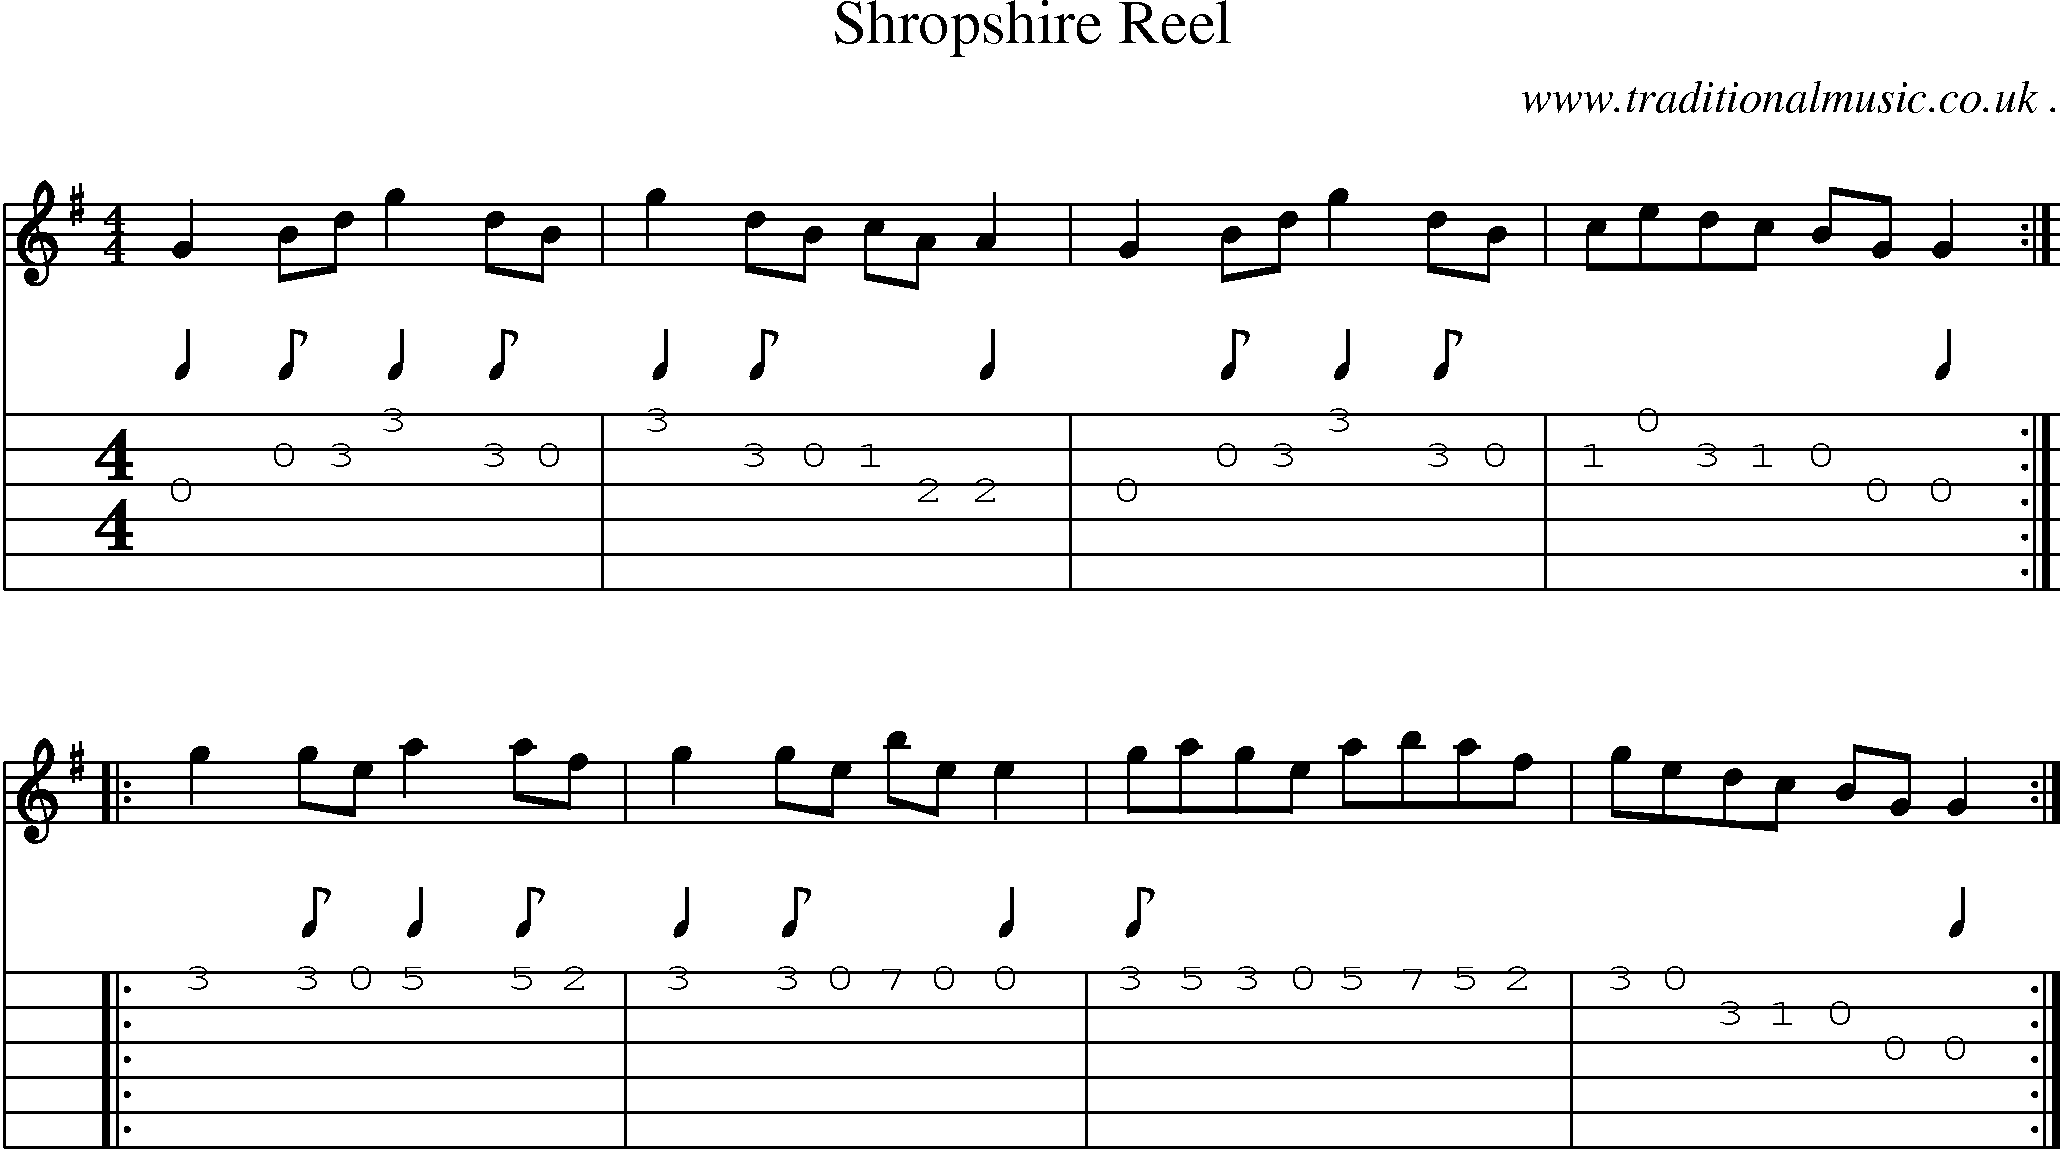 Sheet-Music and Guitar Tabs for Shropshire Reel